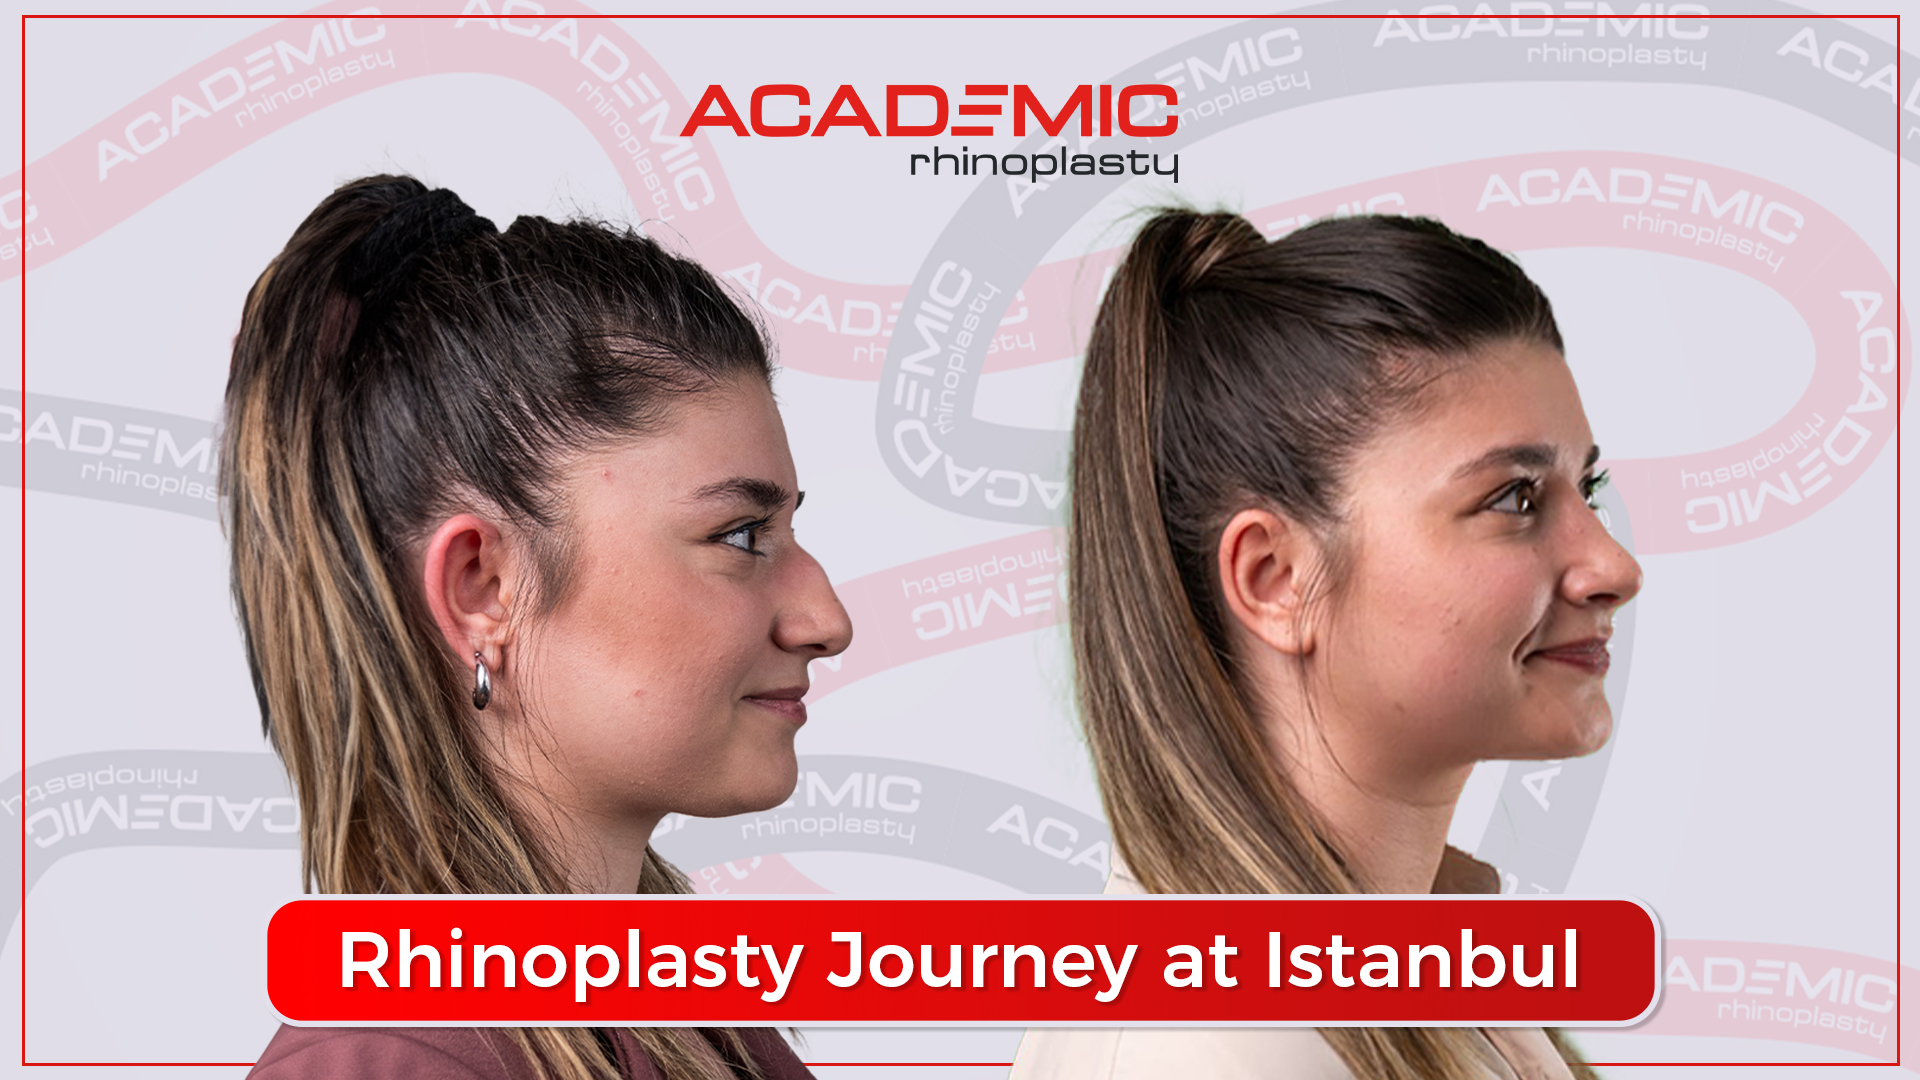 Ms. Ece Shares Her Rhinoplasty Surgery Experience!